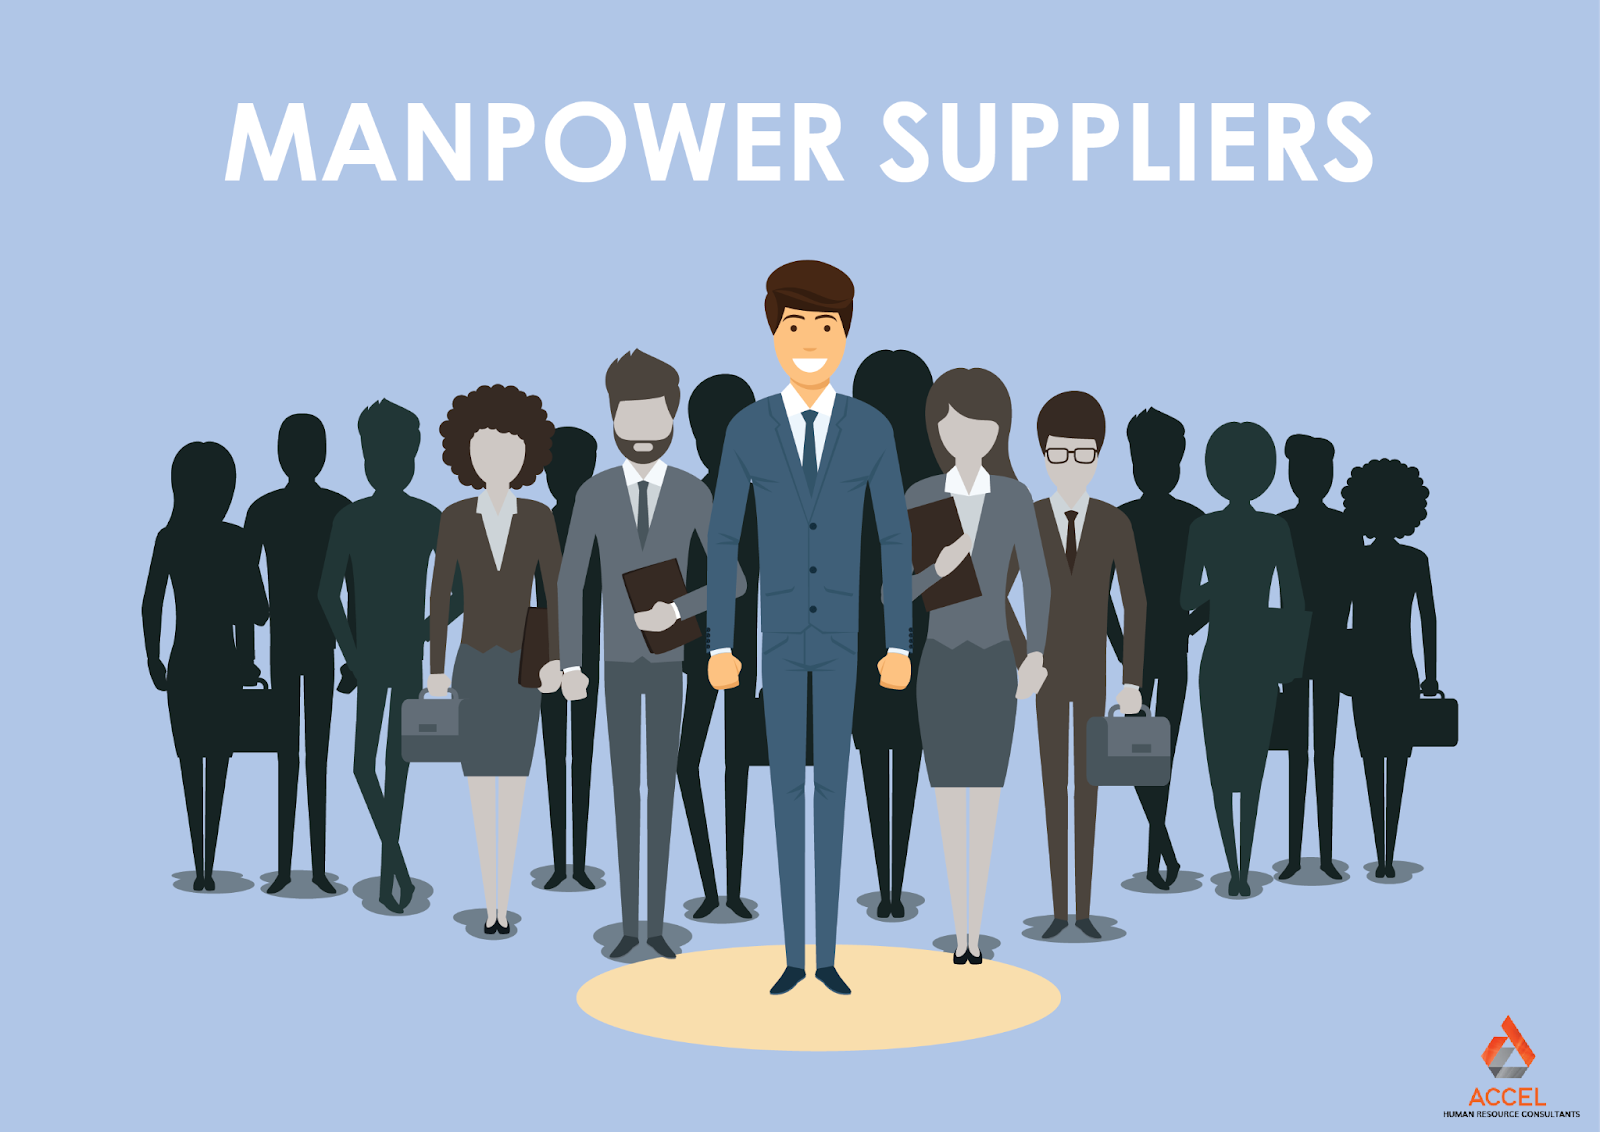 Manpower suppliers in Dubai - 4 Great Reasons Why Hiring Manpower Suppliers Is Beneficial